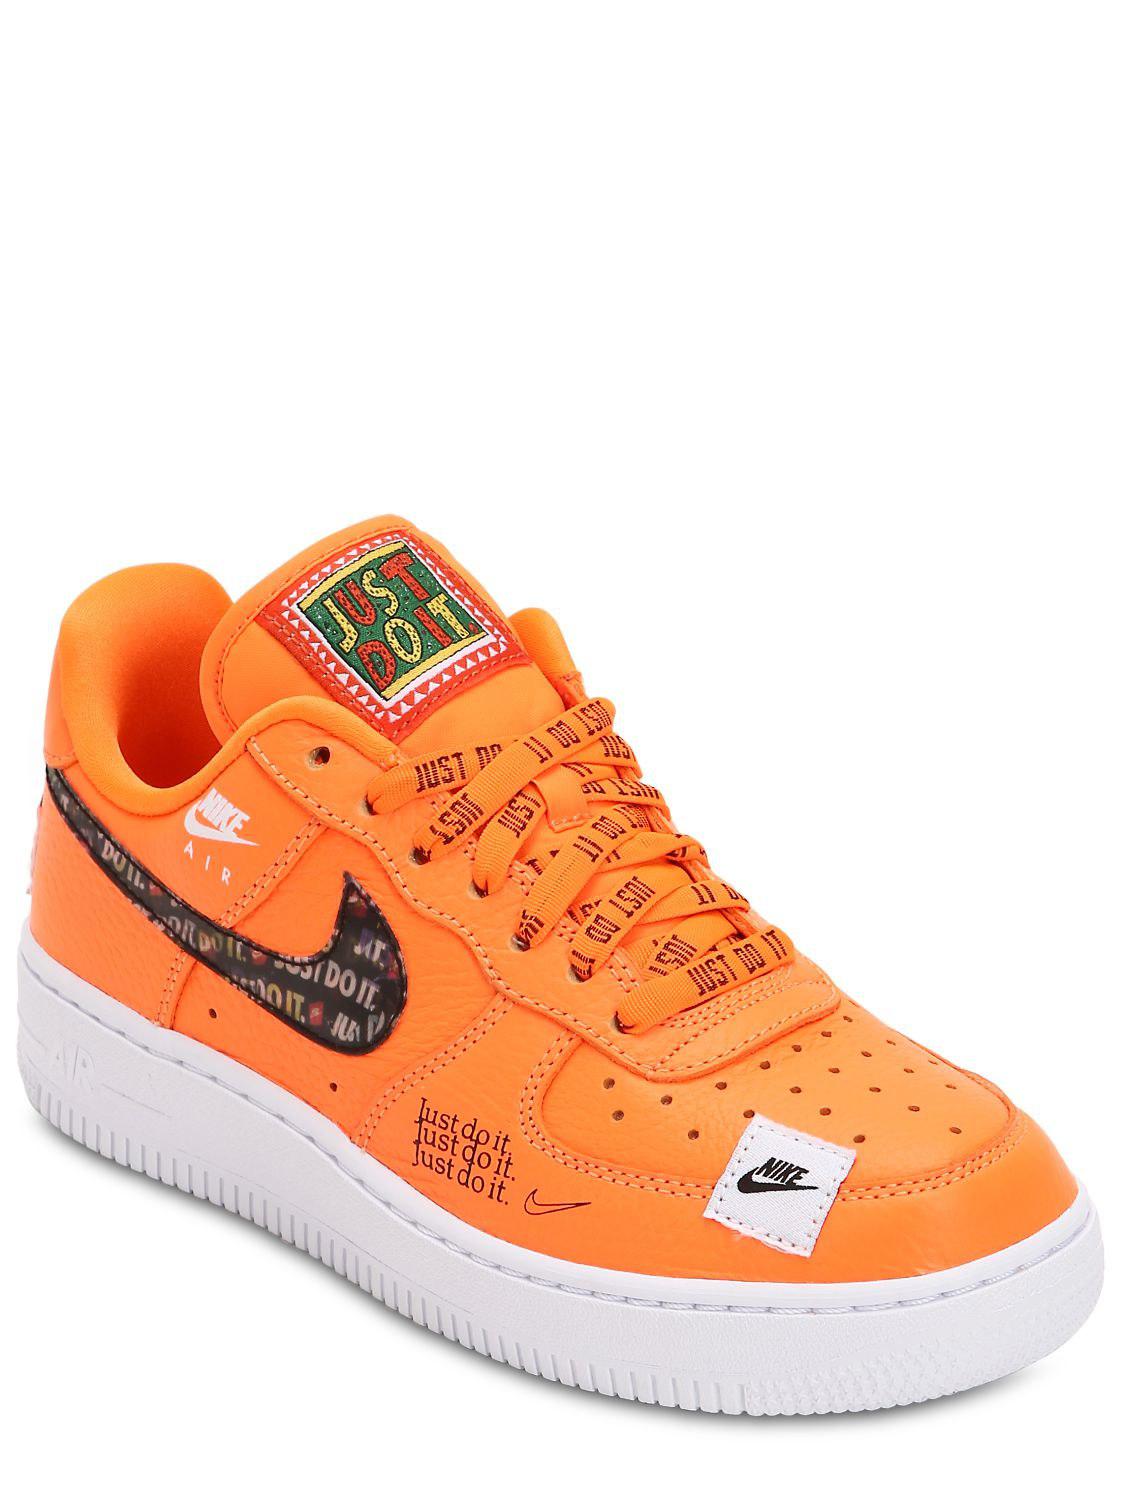 Nike Air Force 1 Just Do It Sneakers in Orange for Men - Lyst